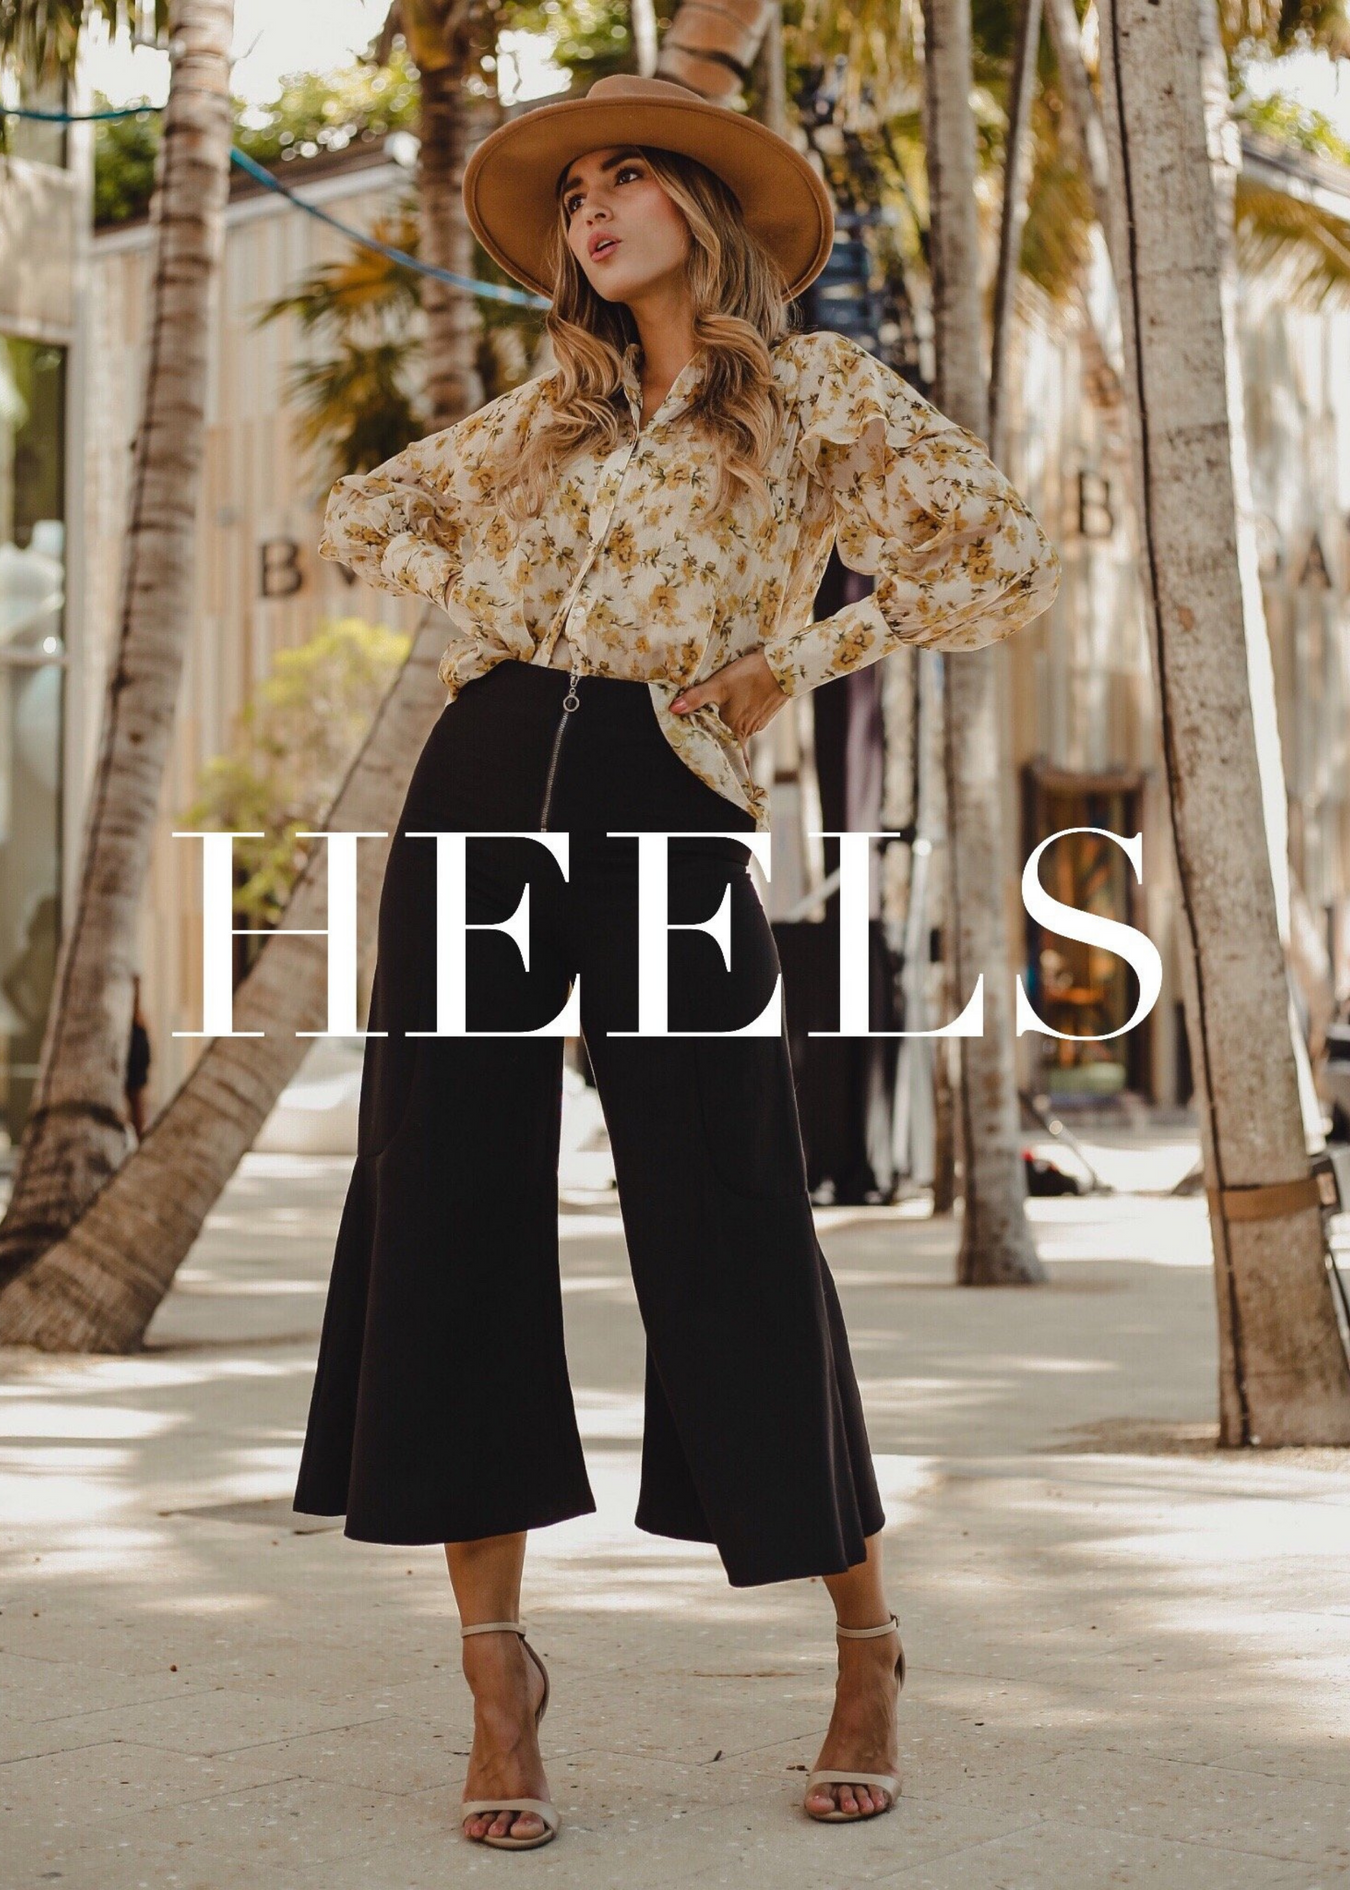 Our heels collection that consists of work heels, classic heels, clear heels, lace-up heels and formal heels. Women wearing work clothing with our nude colored heels, Ali heel which is a comfortable heel that is timeless heel.